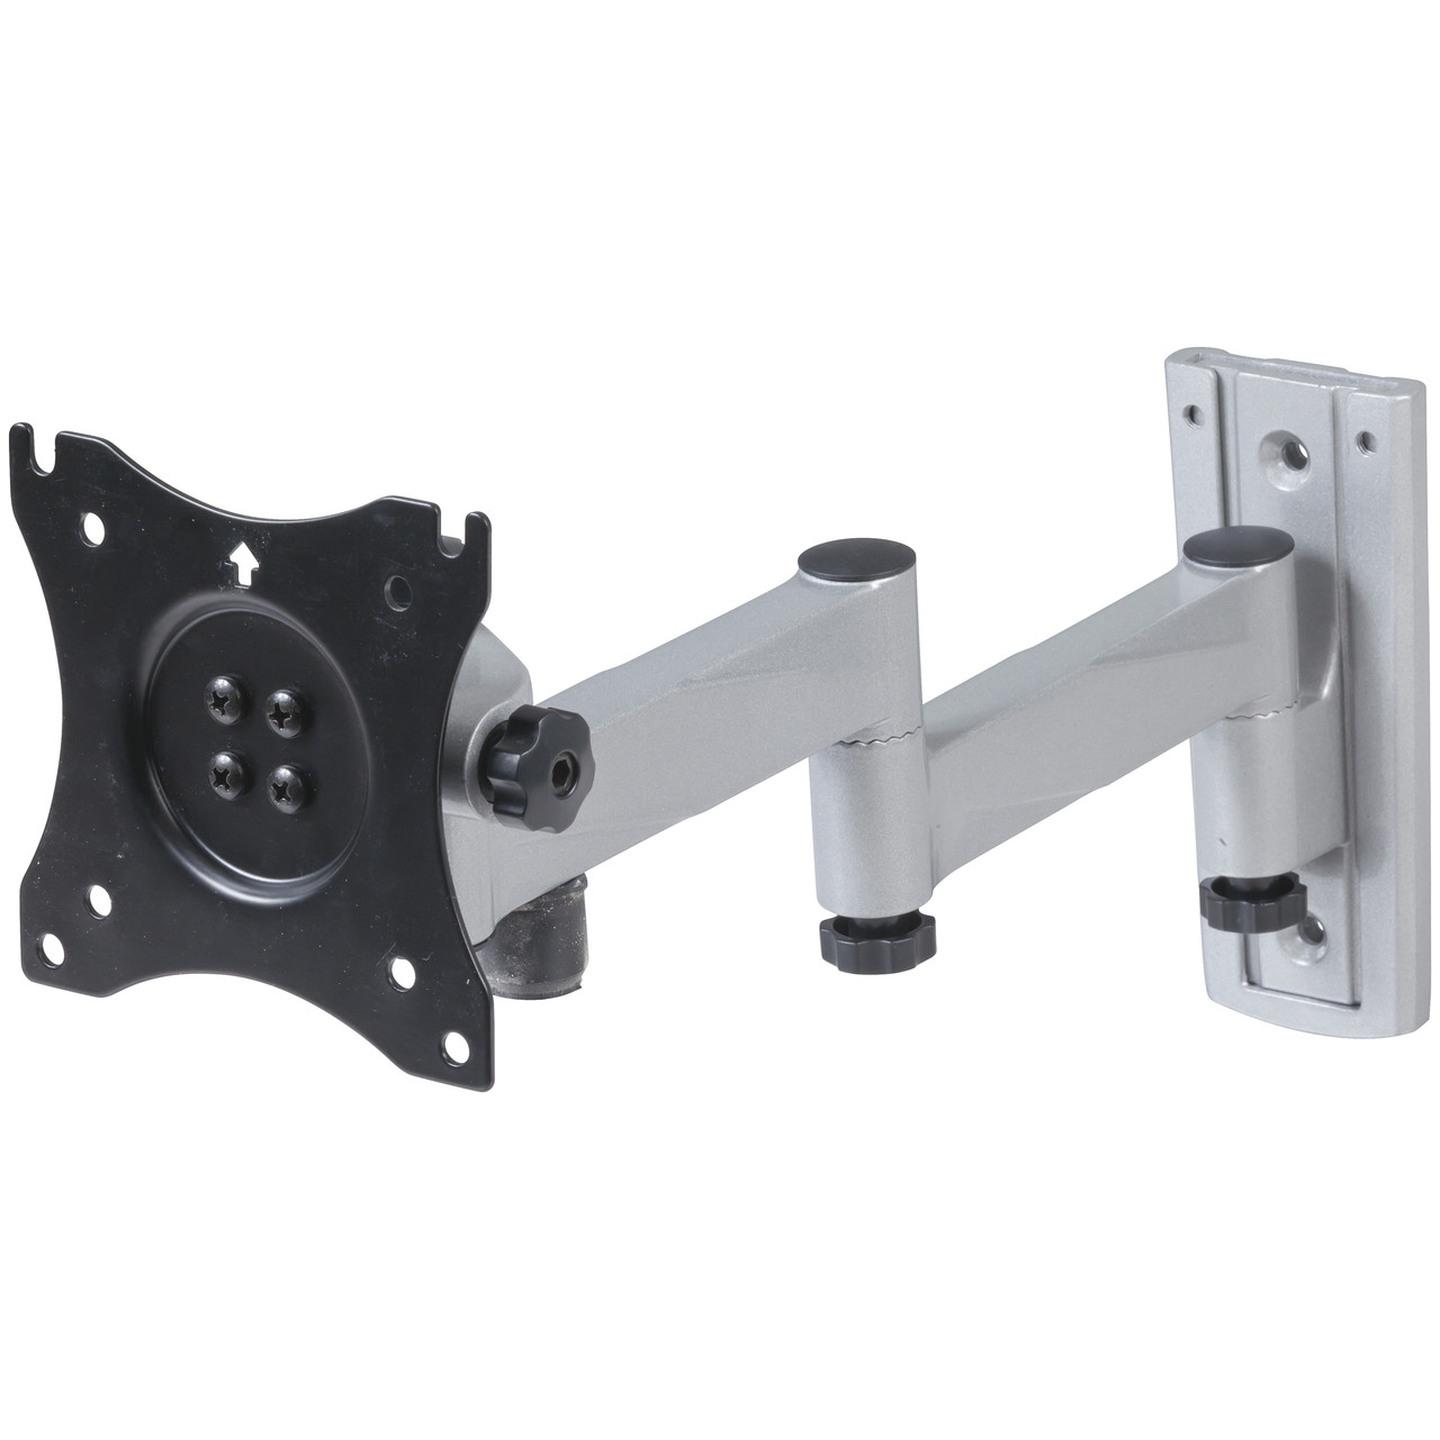 LCD Monitor Swing Arm Wall Bracket with Two Slide-In Locking Plates